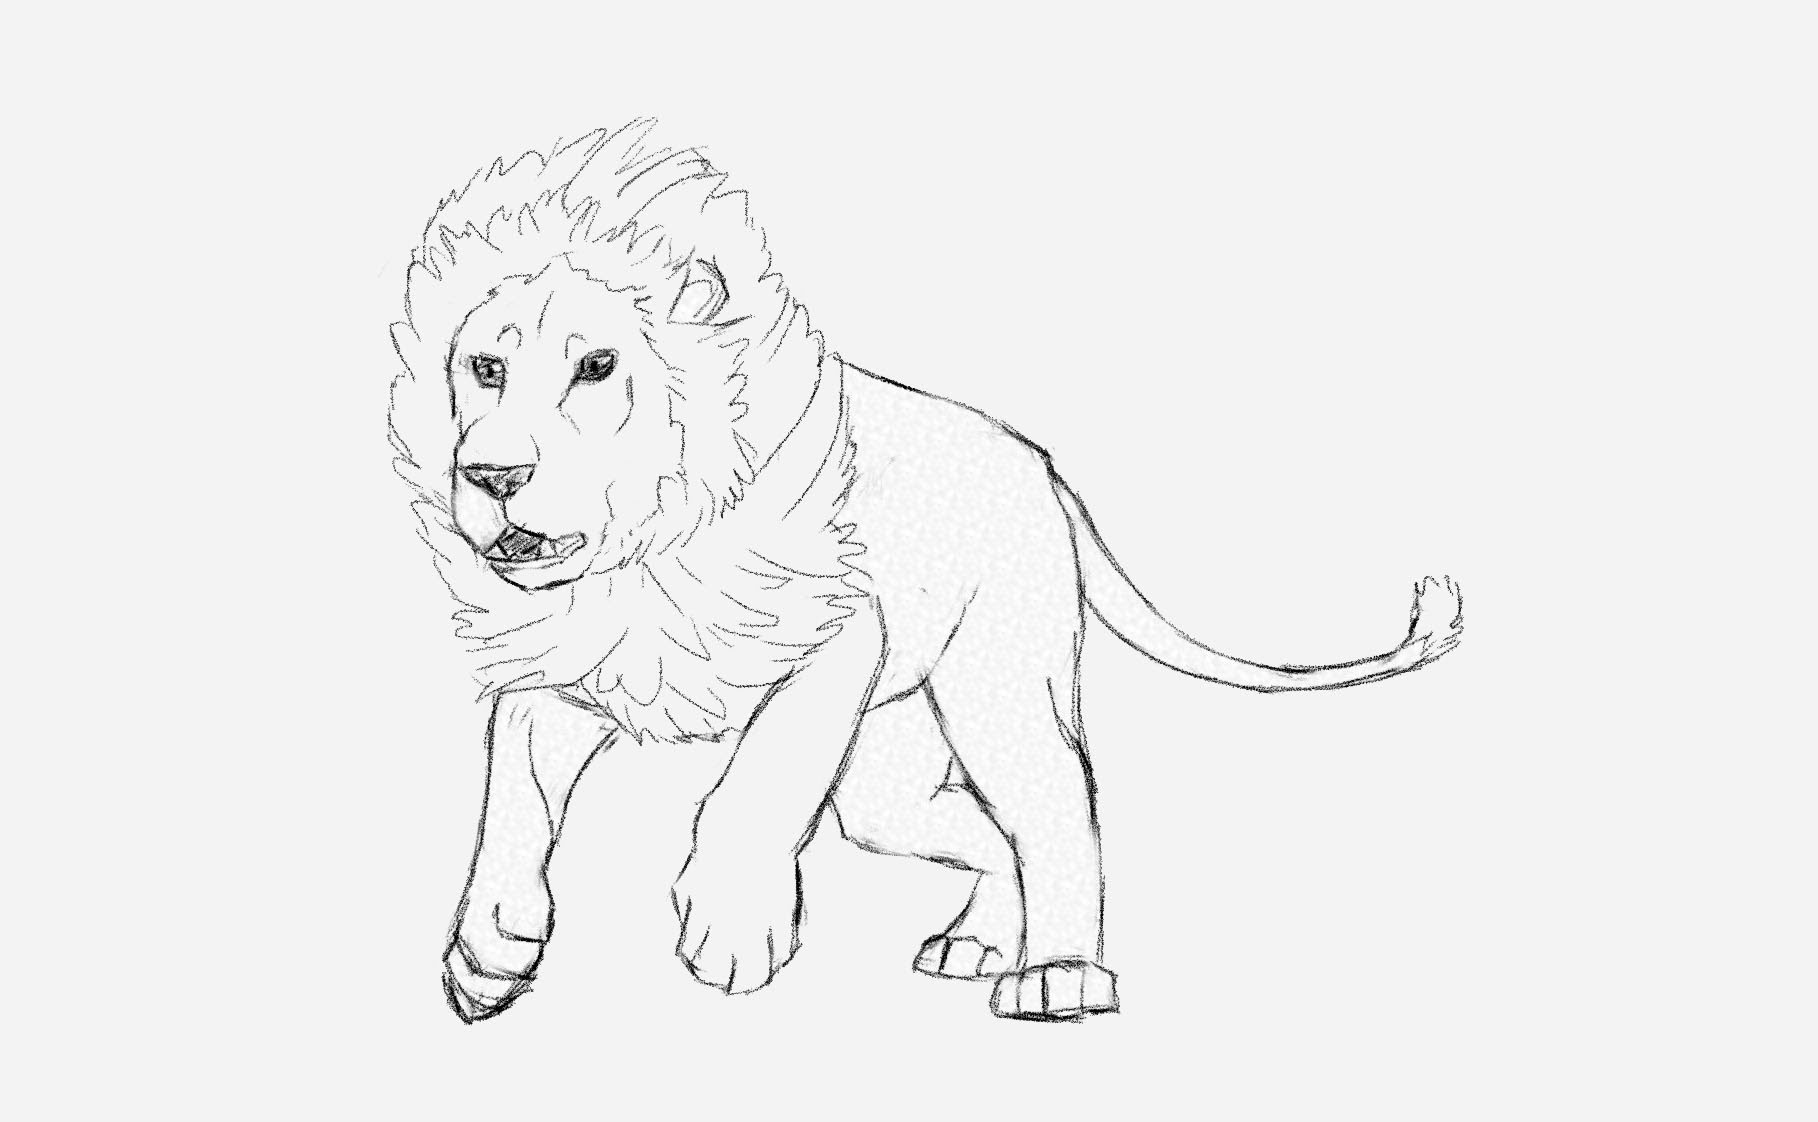 ART / DRAWING / ILLUSTRATION / PAINTING / SKETCHING - Anikartick: LION KING  - Drawing,Illustration,Pen and Pencil Sketch And Line Drawing - 01